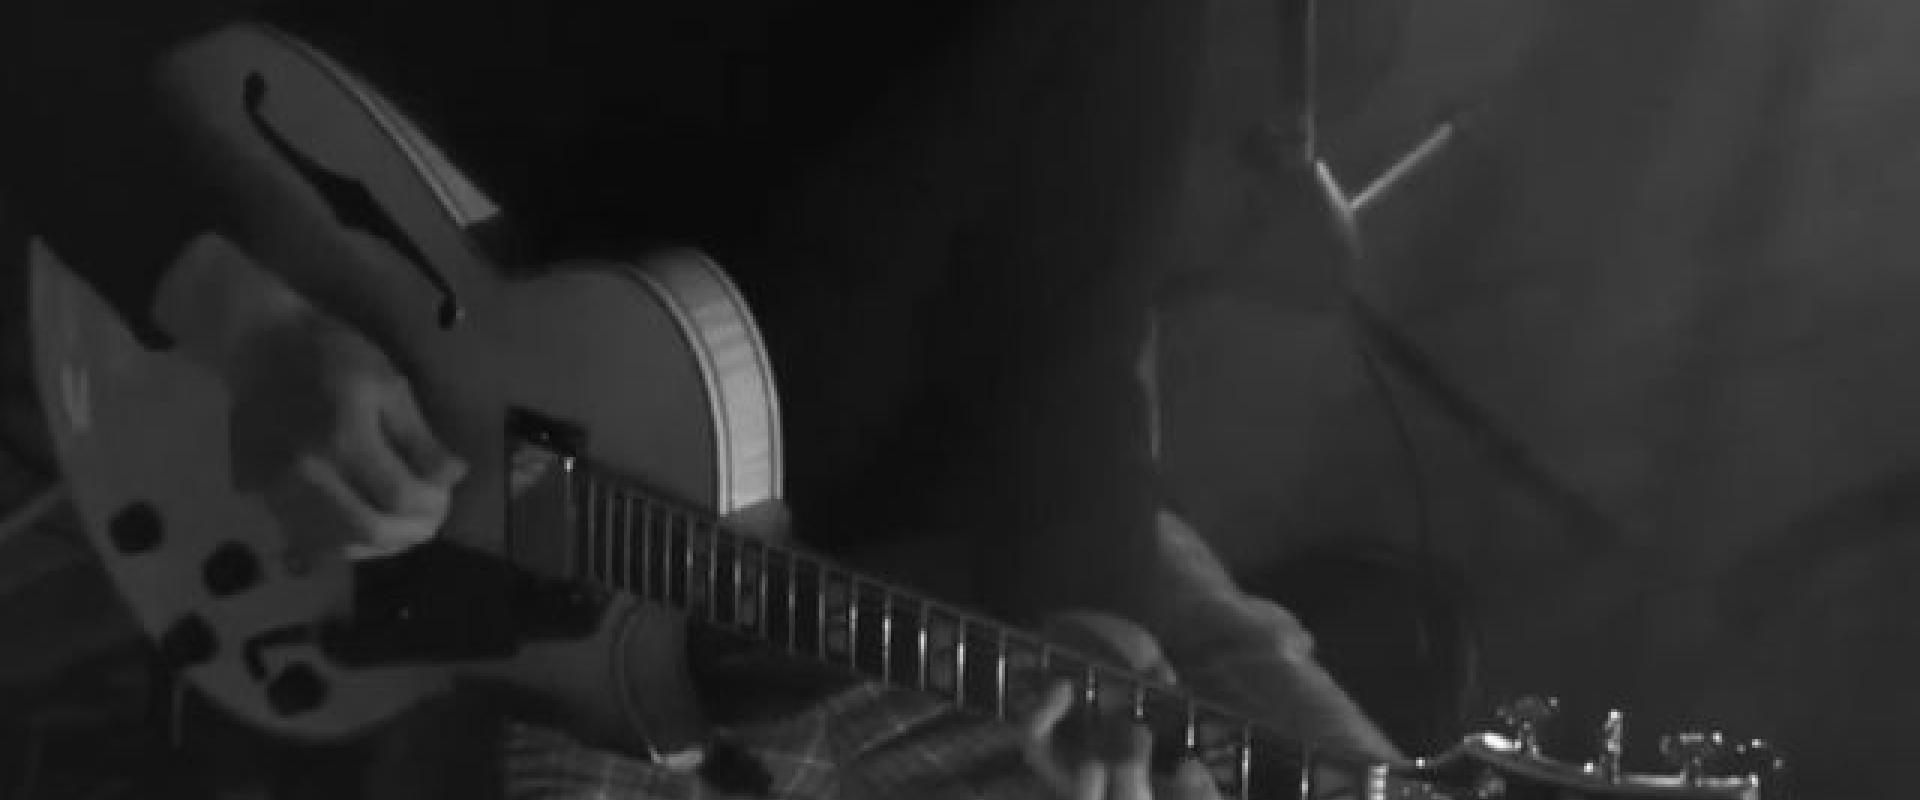 Black and white image of Gabe Mink playing guitar.